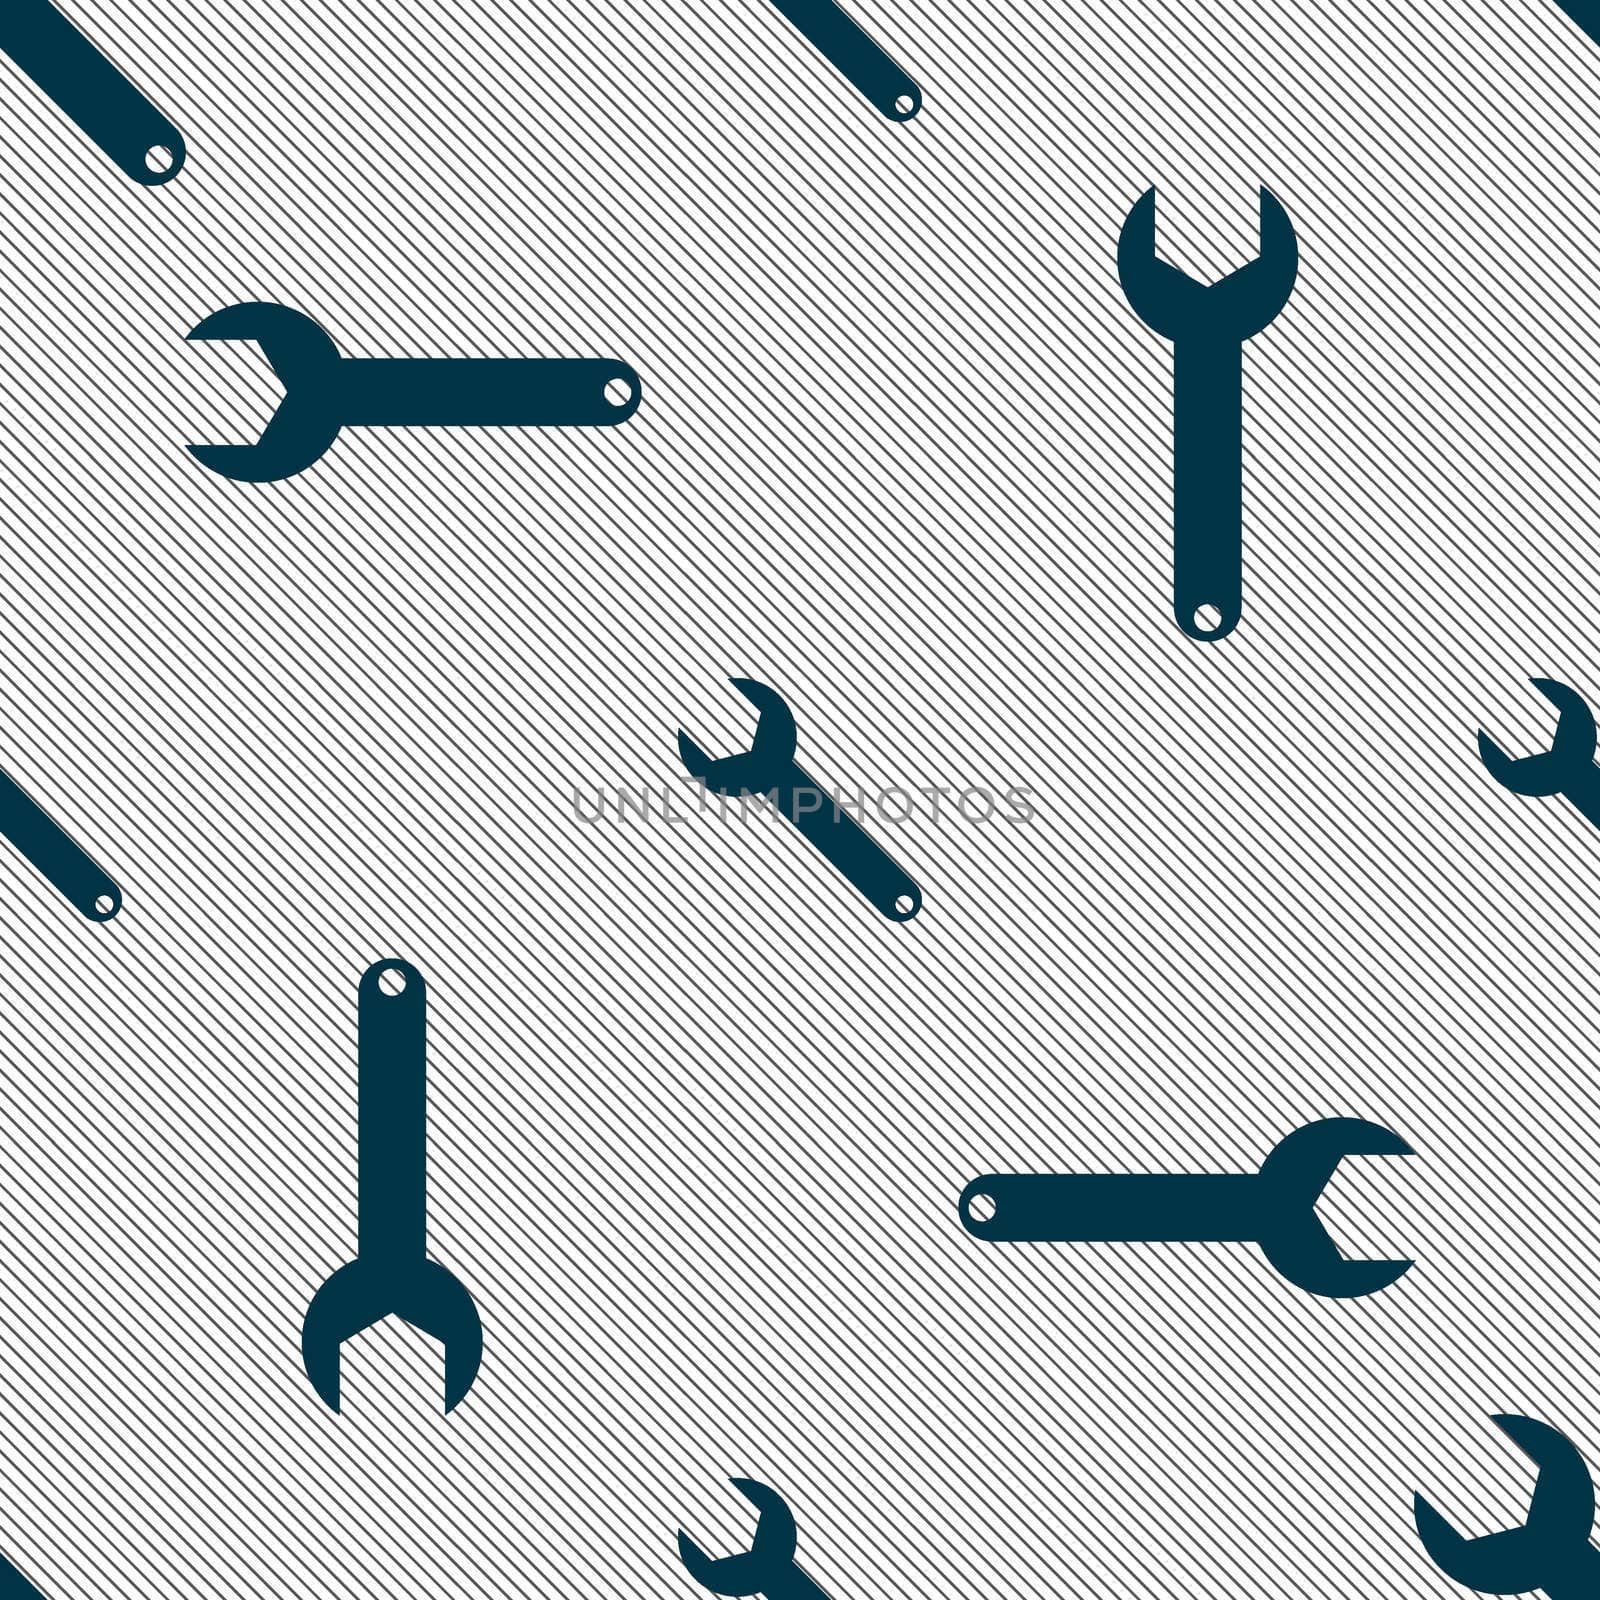 Wrench key sign icon. Service tool symbol. Seamless pattern with geometric texture. illustration